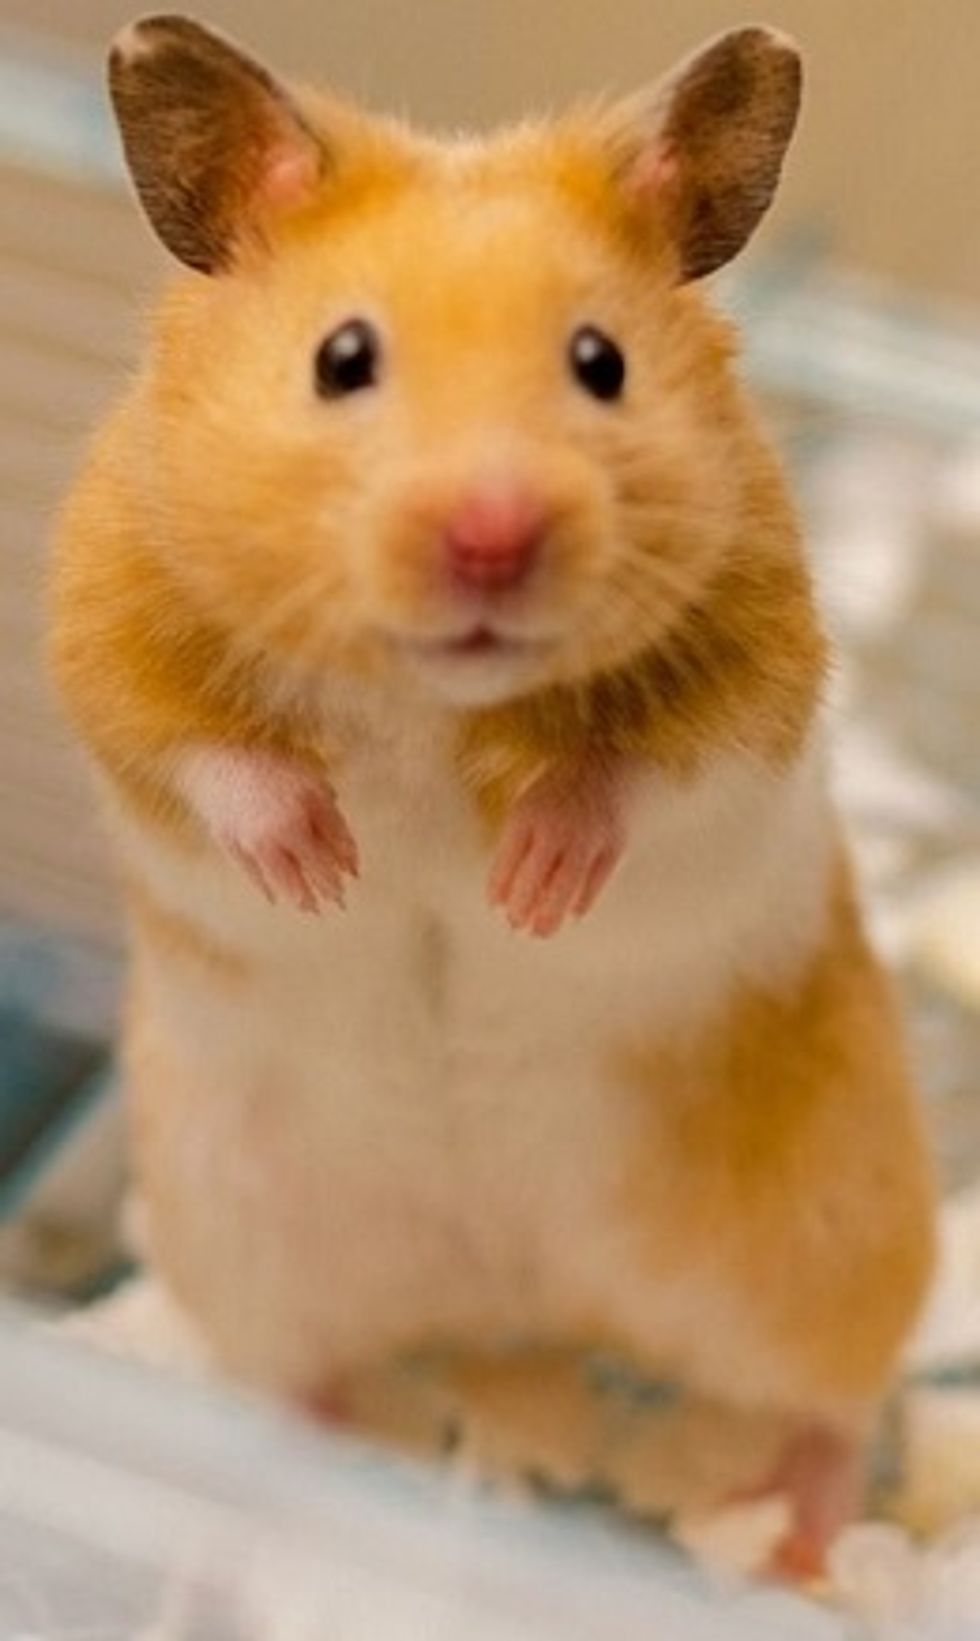 Tips And Tricks To Owning a Hamster